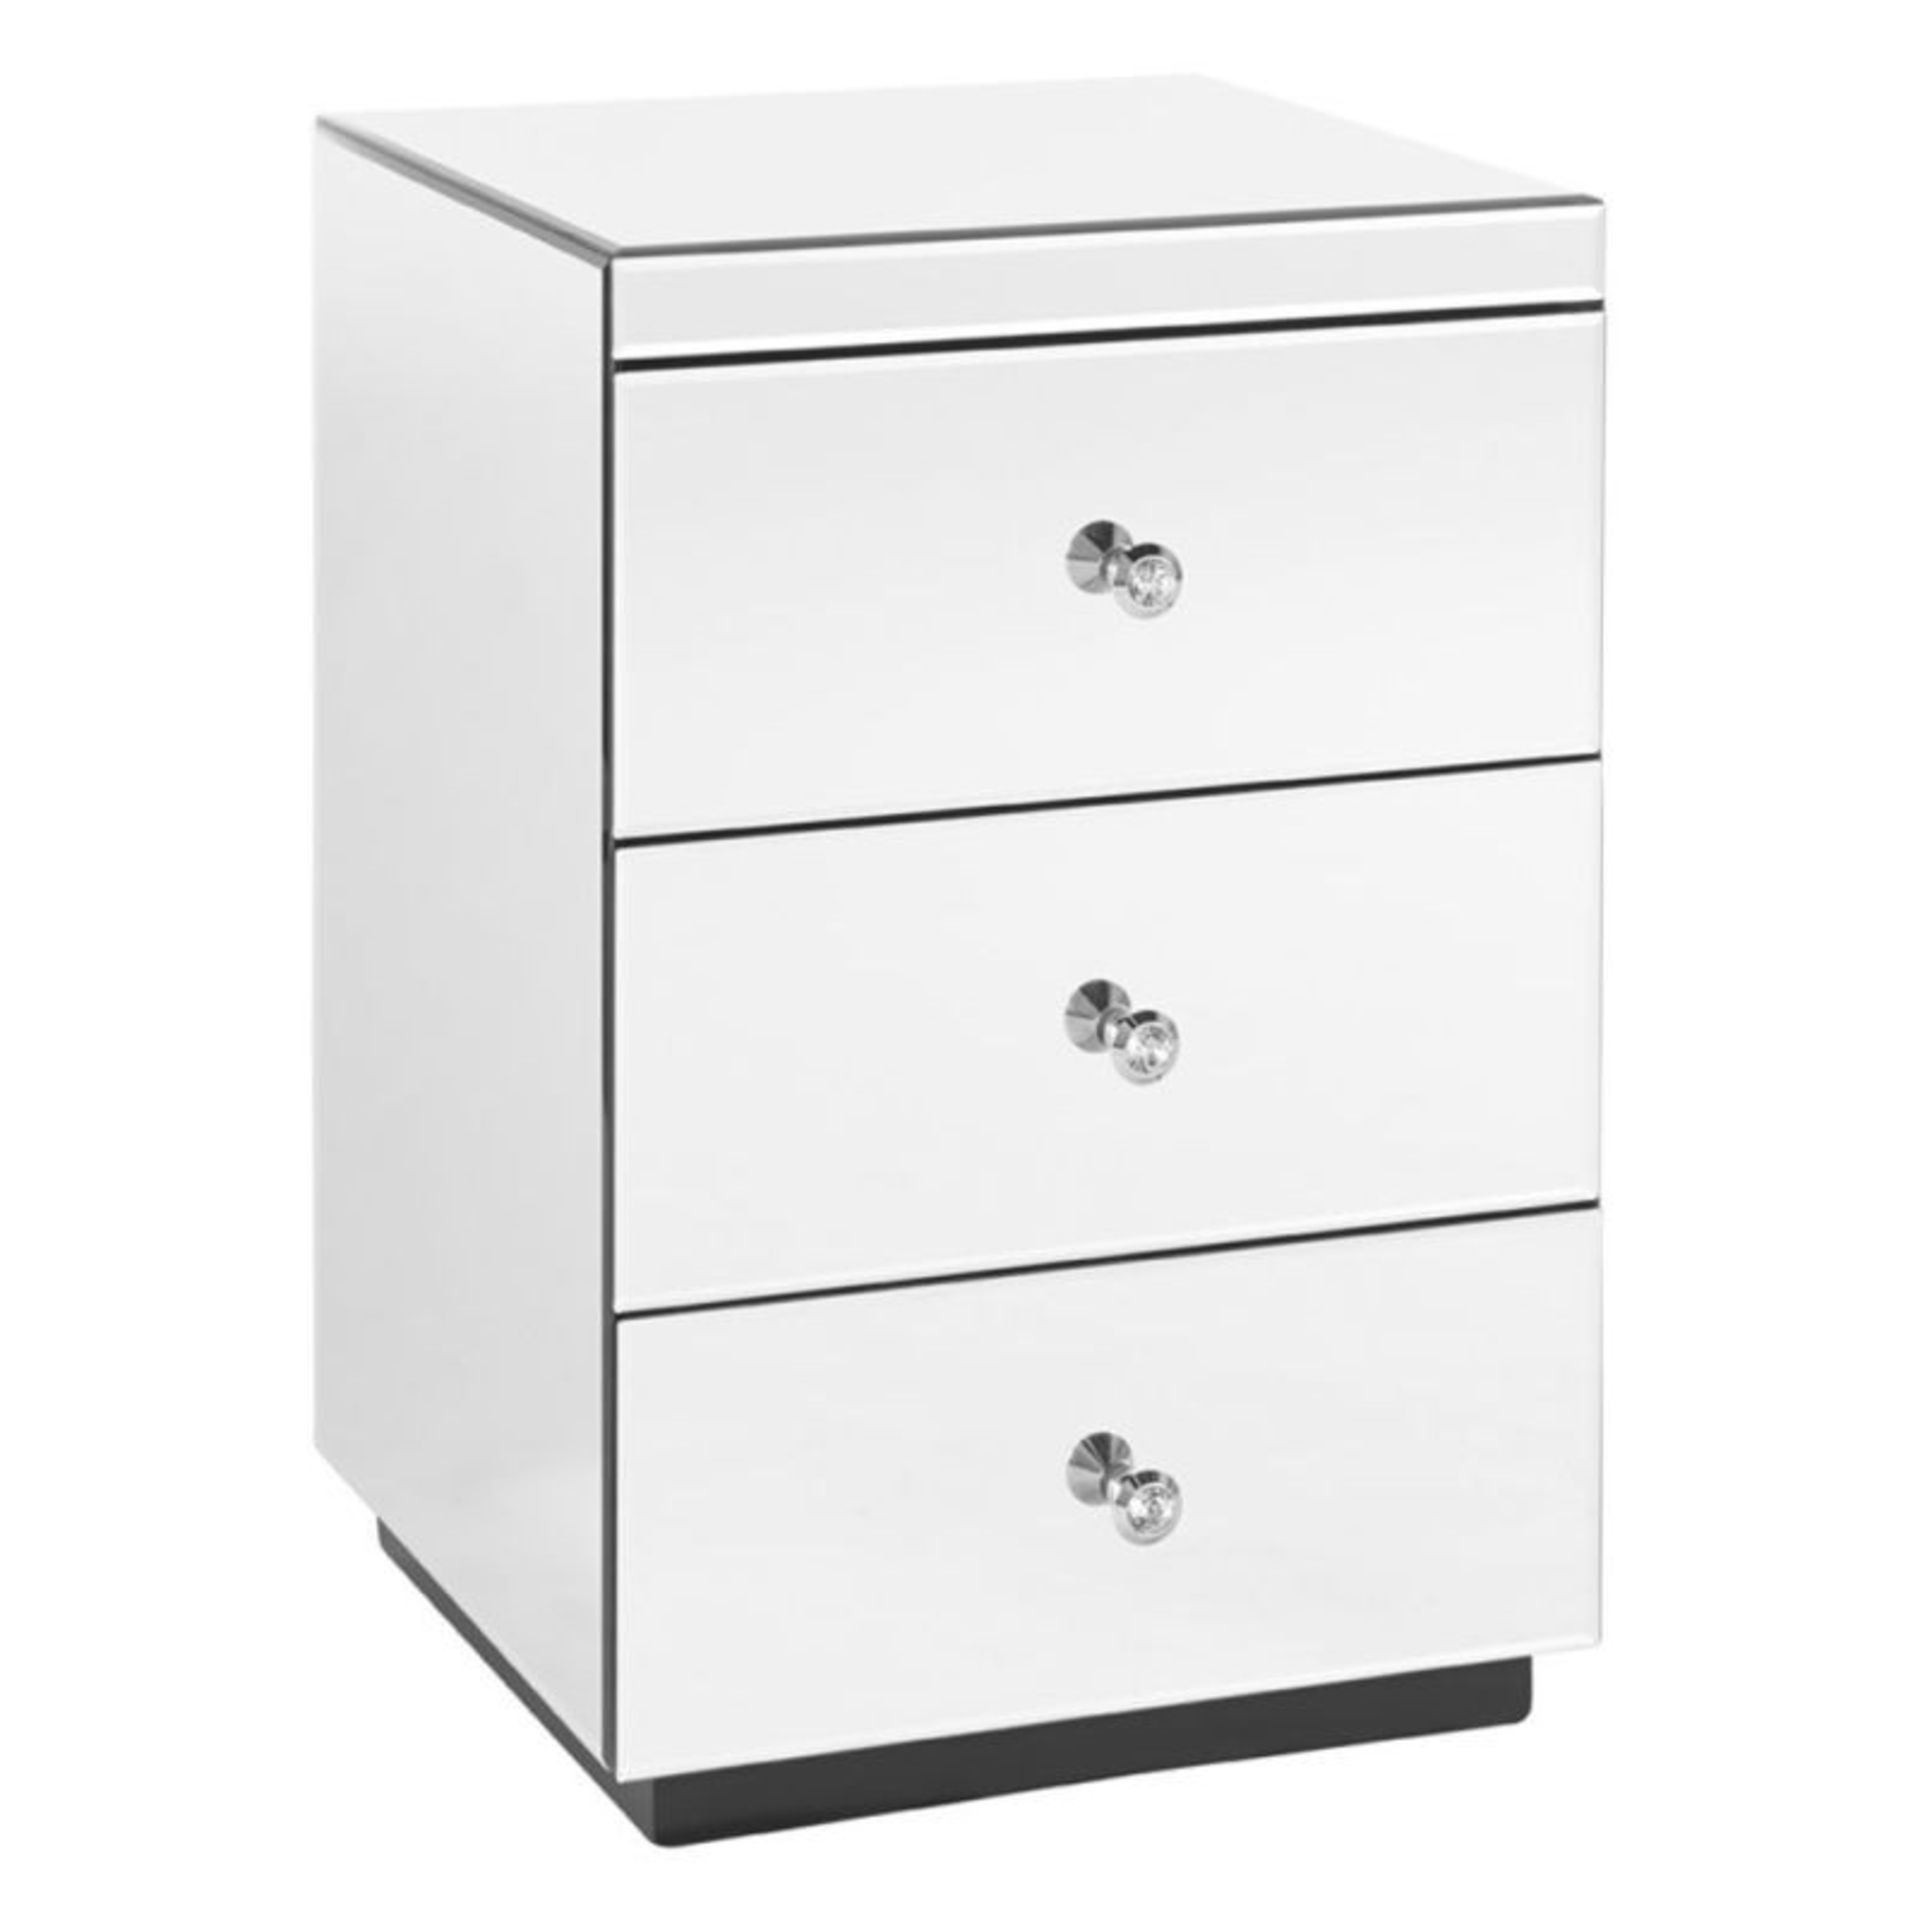 Brand new direct from the manufacturers the shard glass mirrored 3 drawer bedside cabinet in dusk,